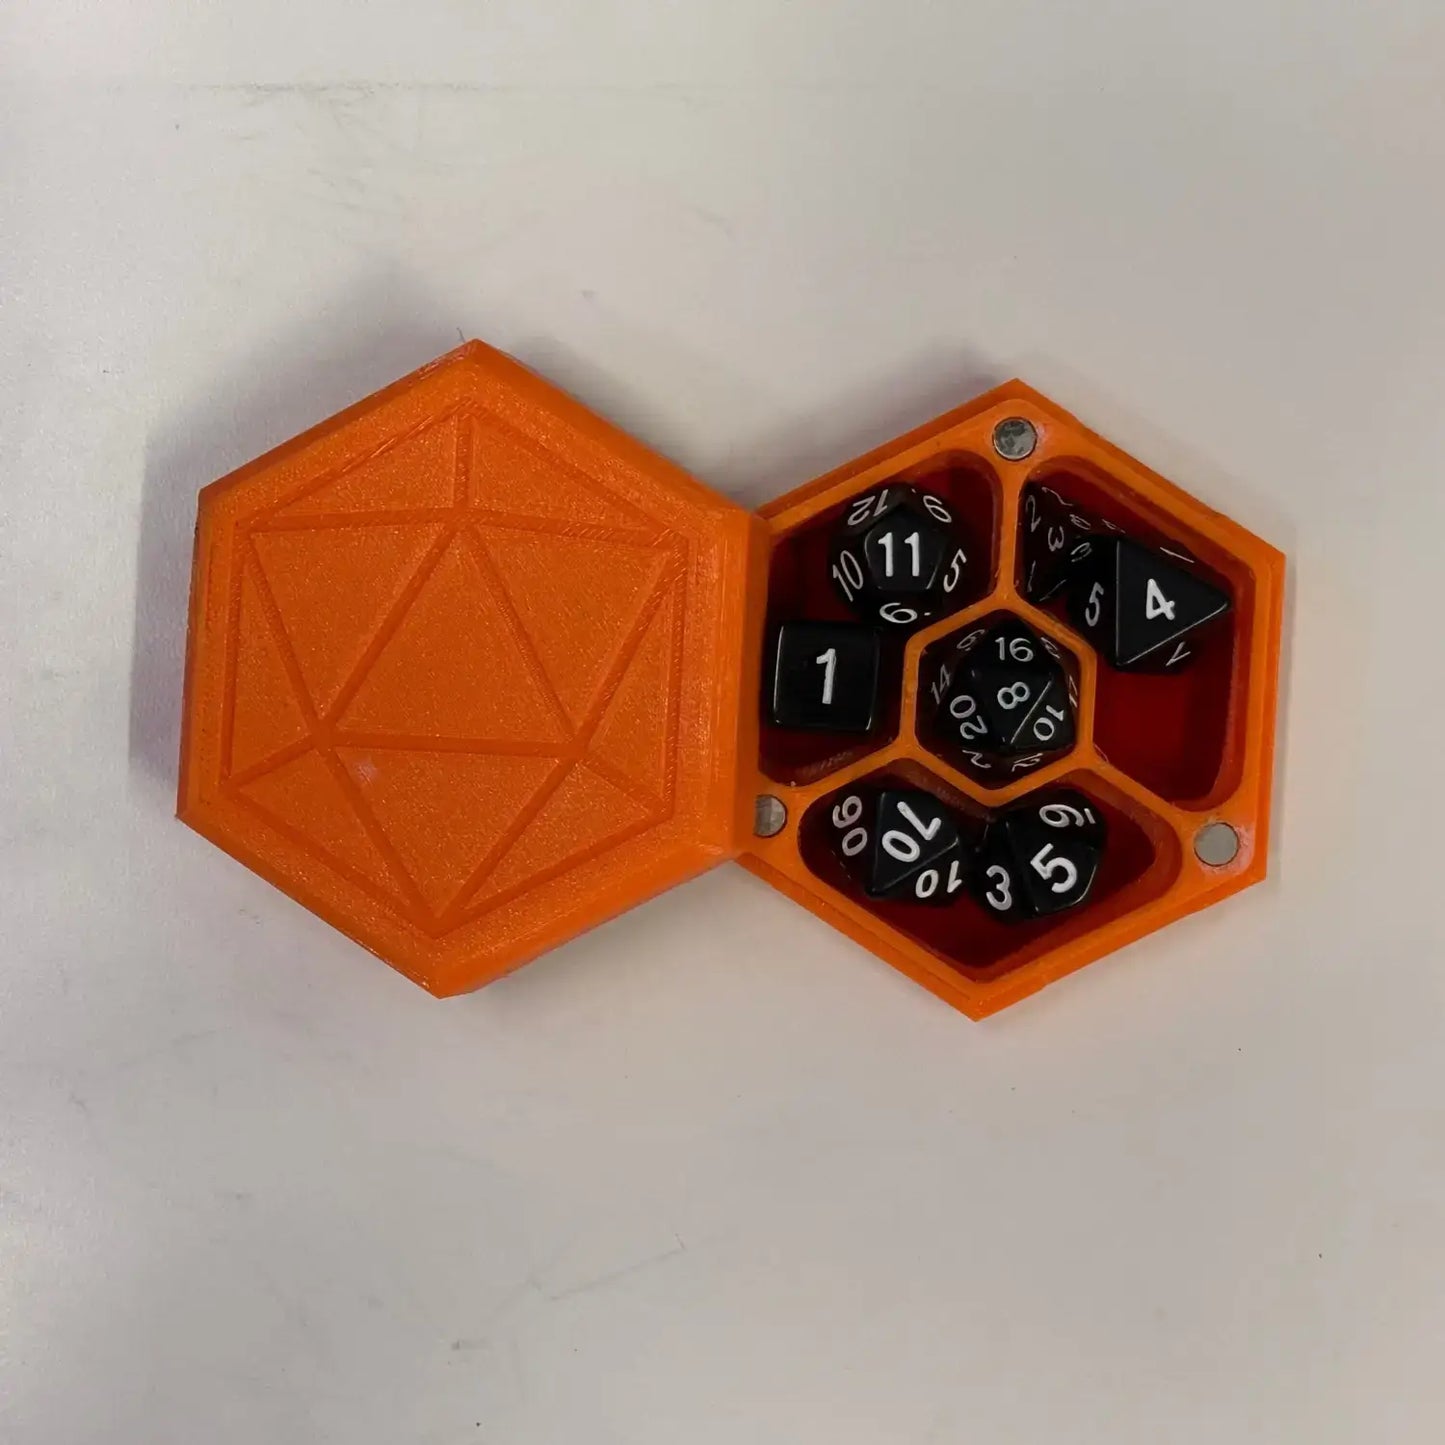 Felt lined Dice Box for DnD or table top games - Orange Case